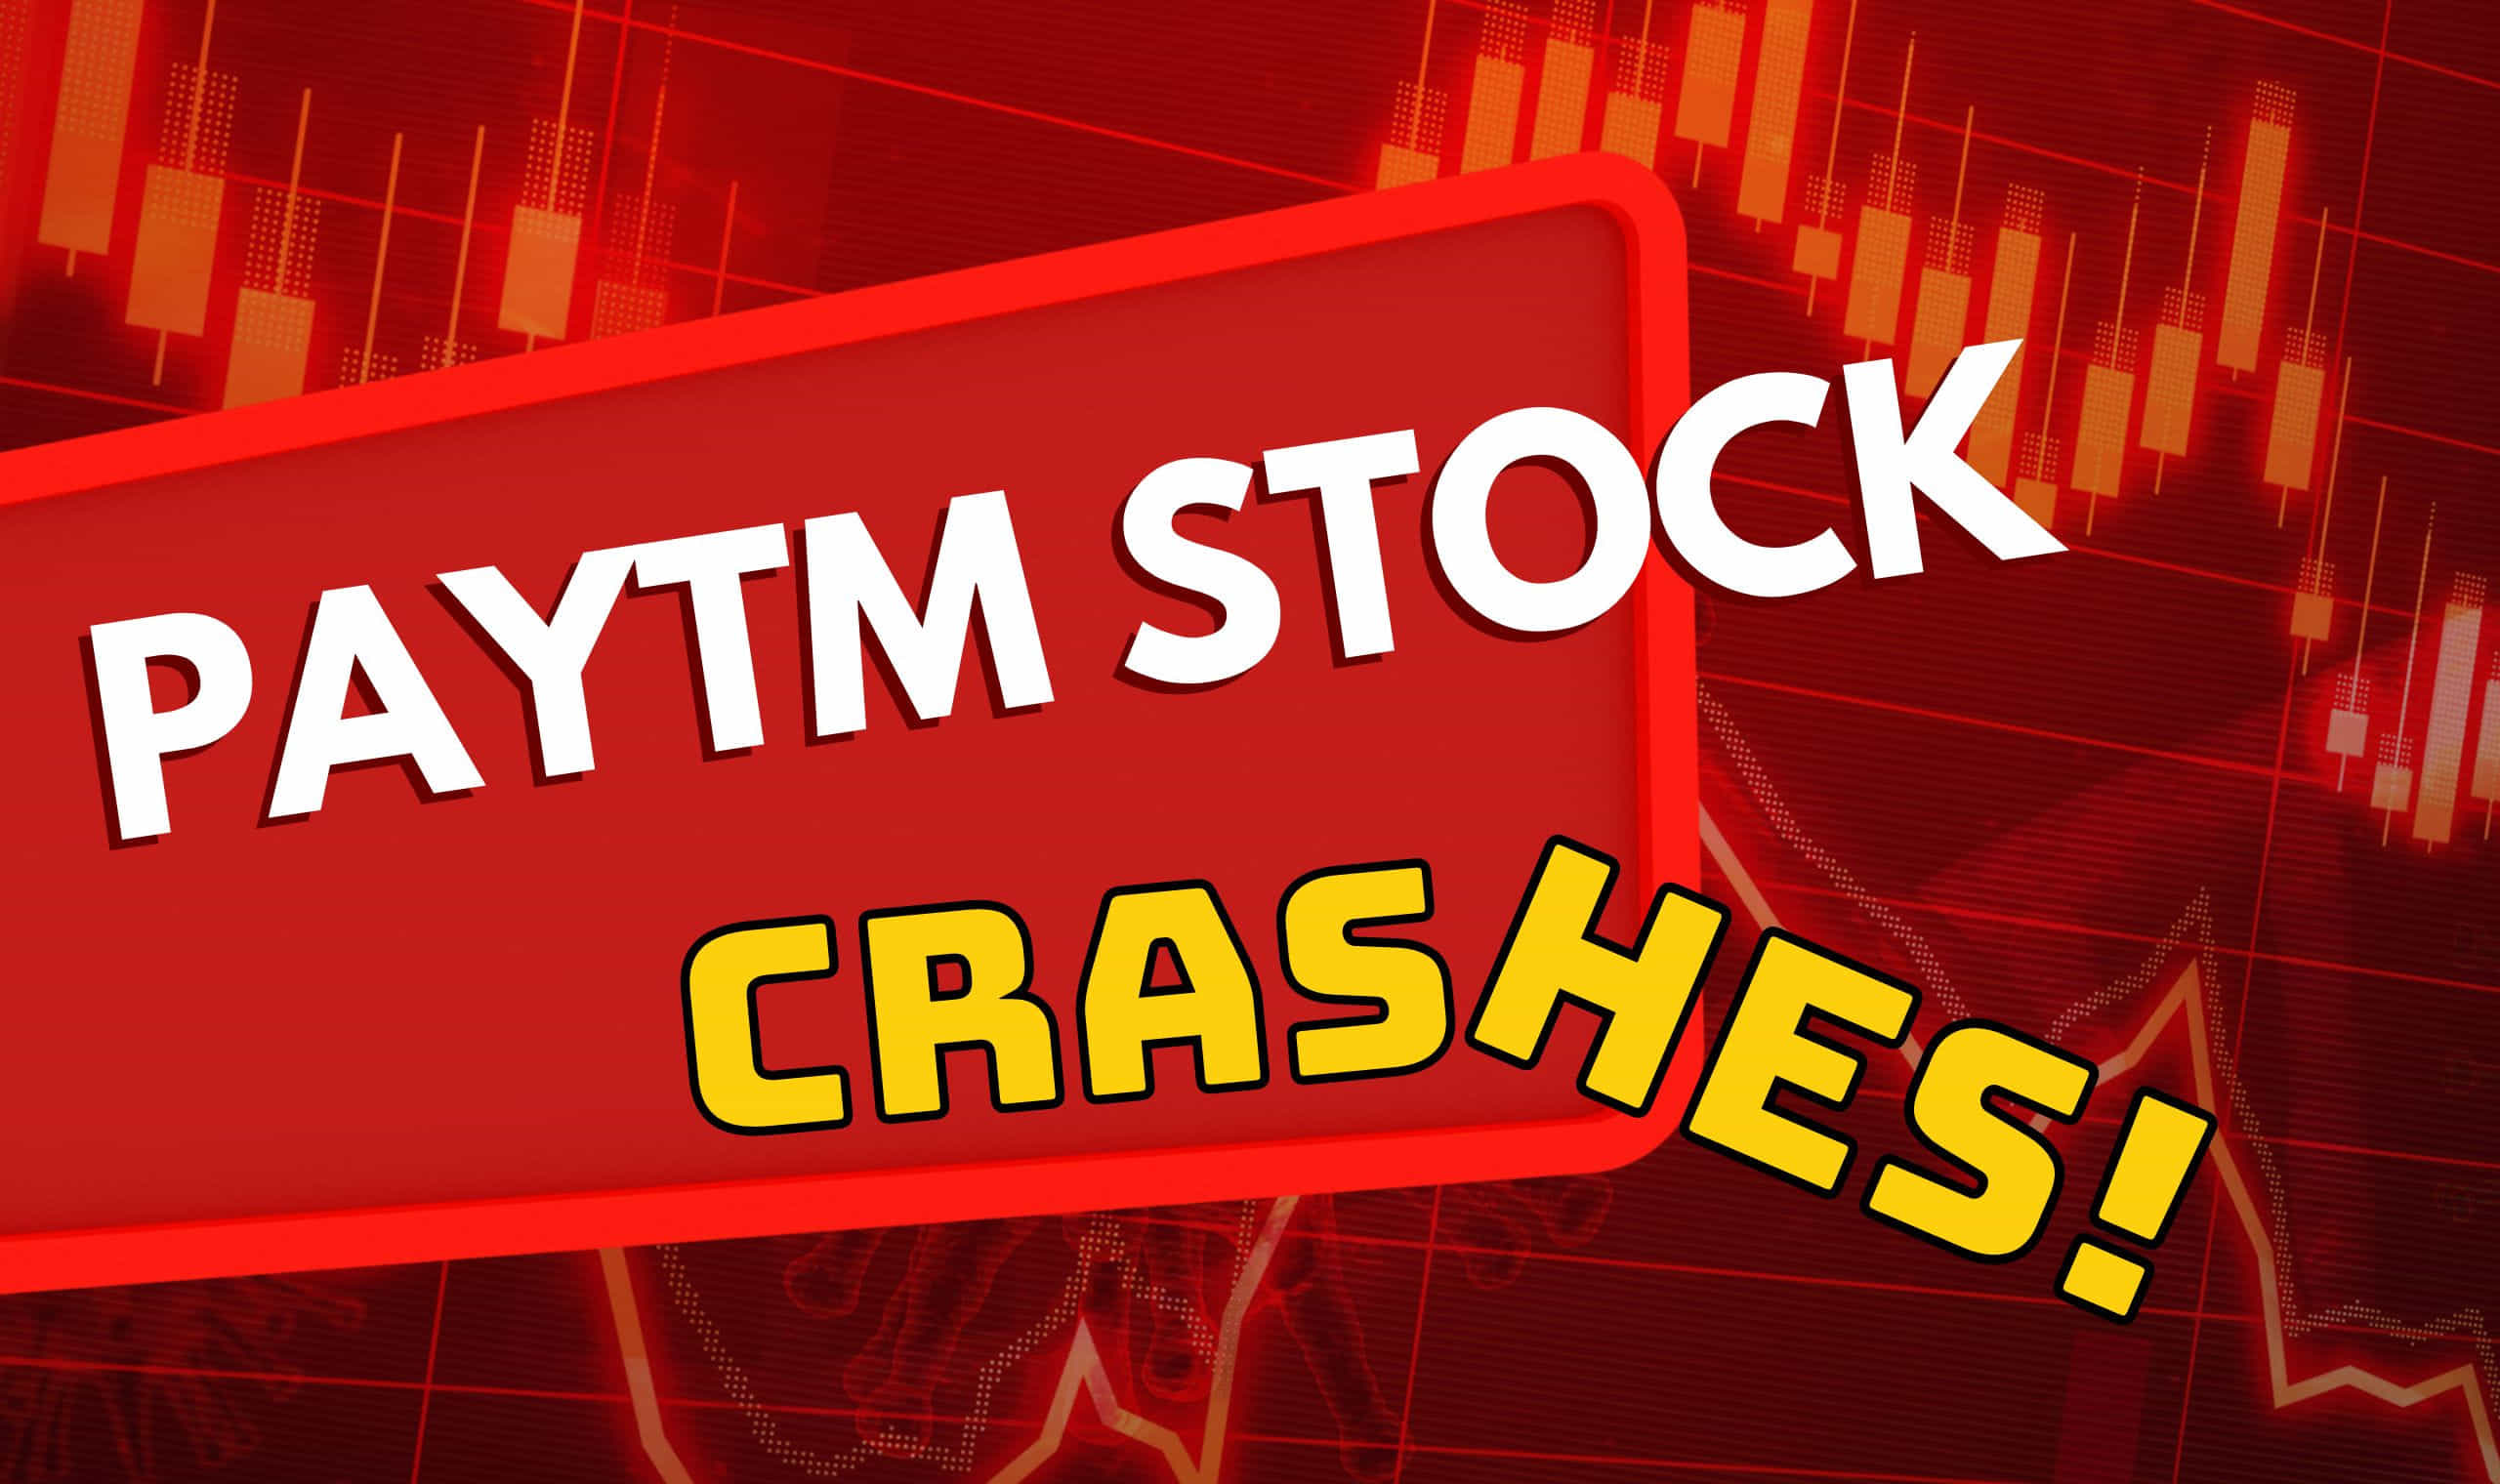 Paytm-Stock-Crashes-Down-42%-in-3-Days-Hits-New-Low-Stock-Markets